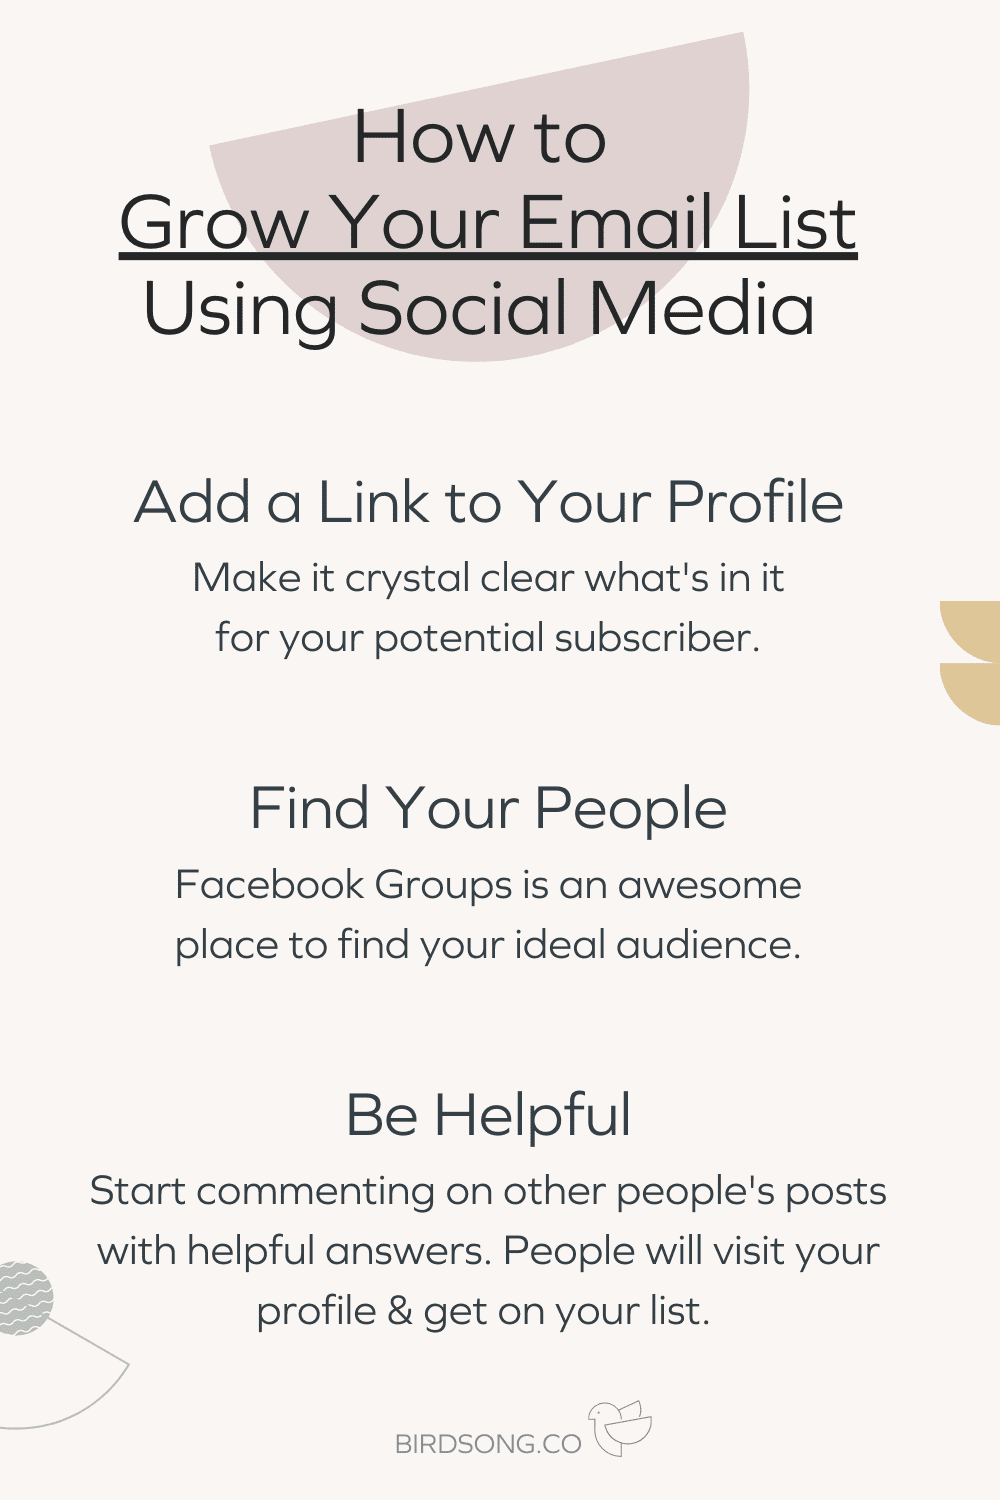 Use Social Media to Grow Email List